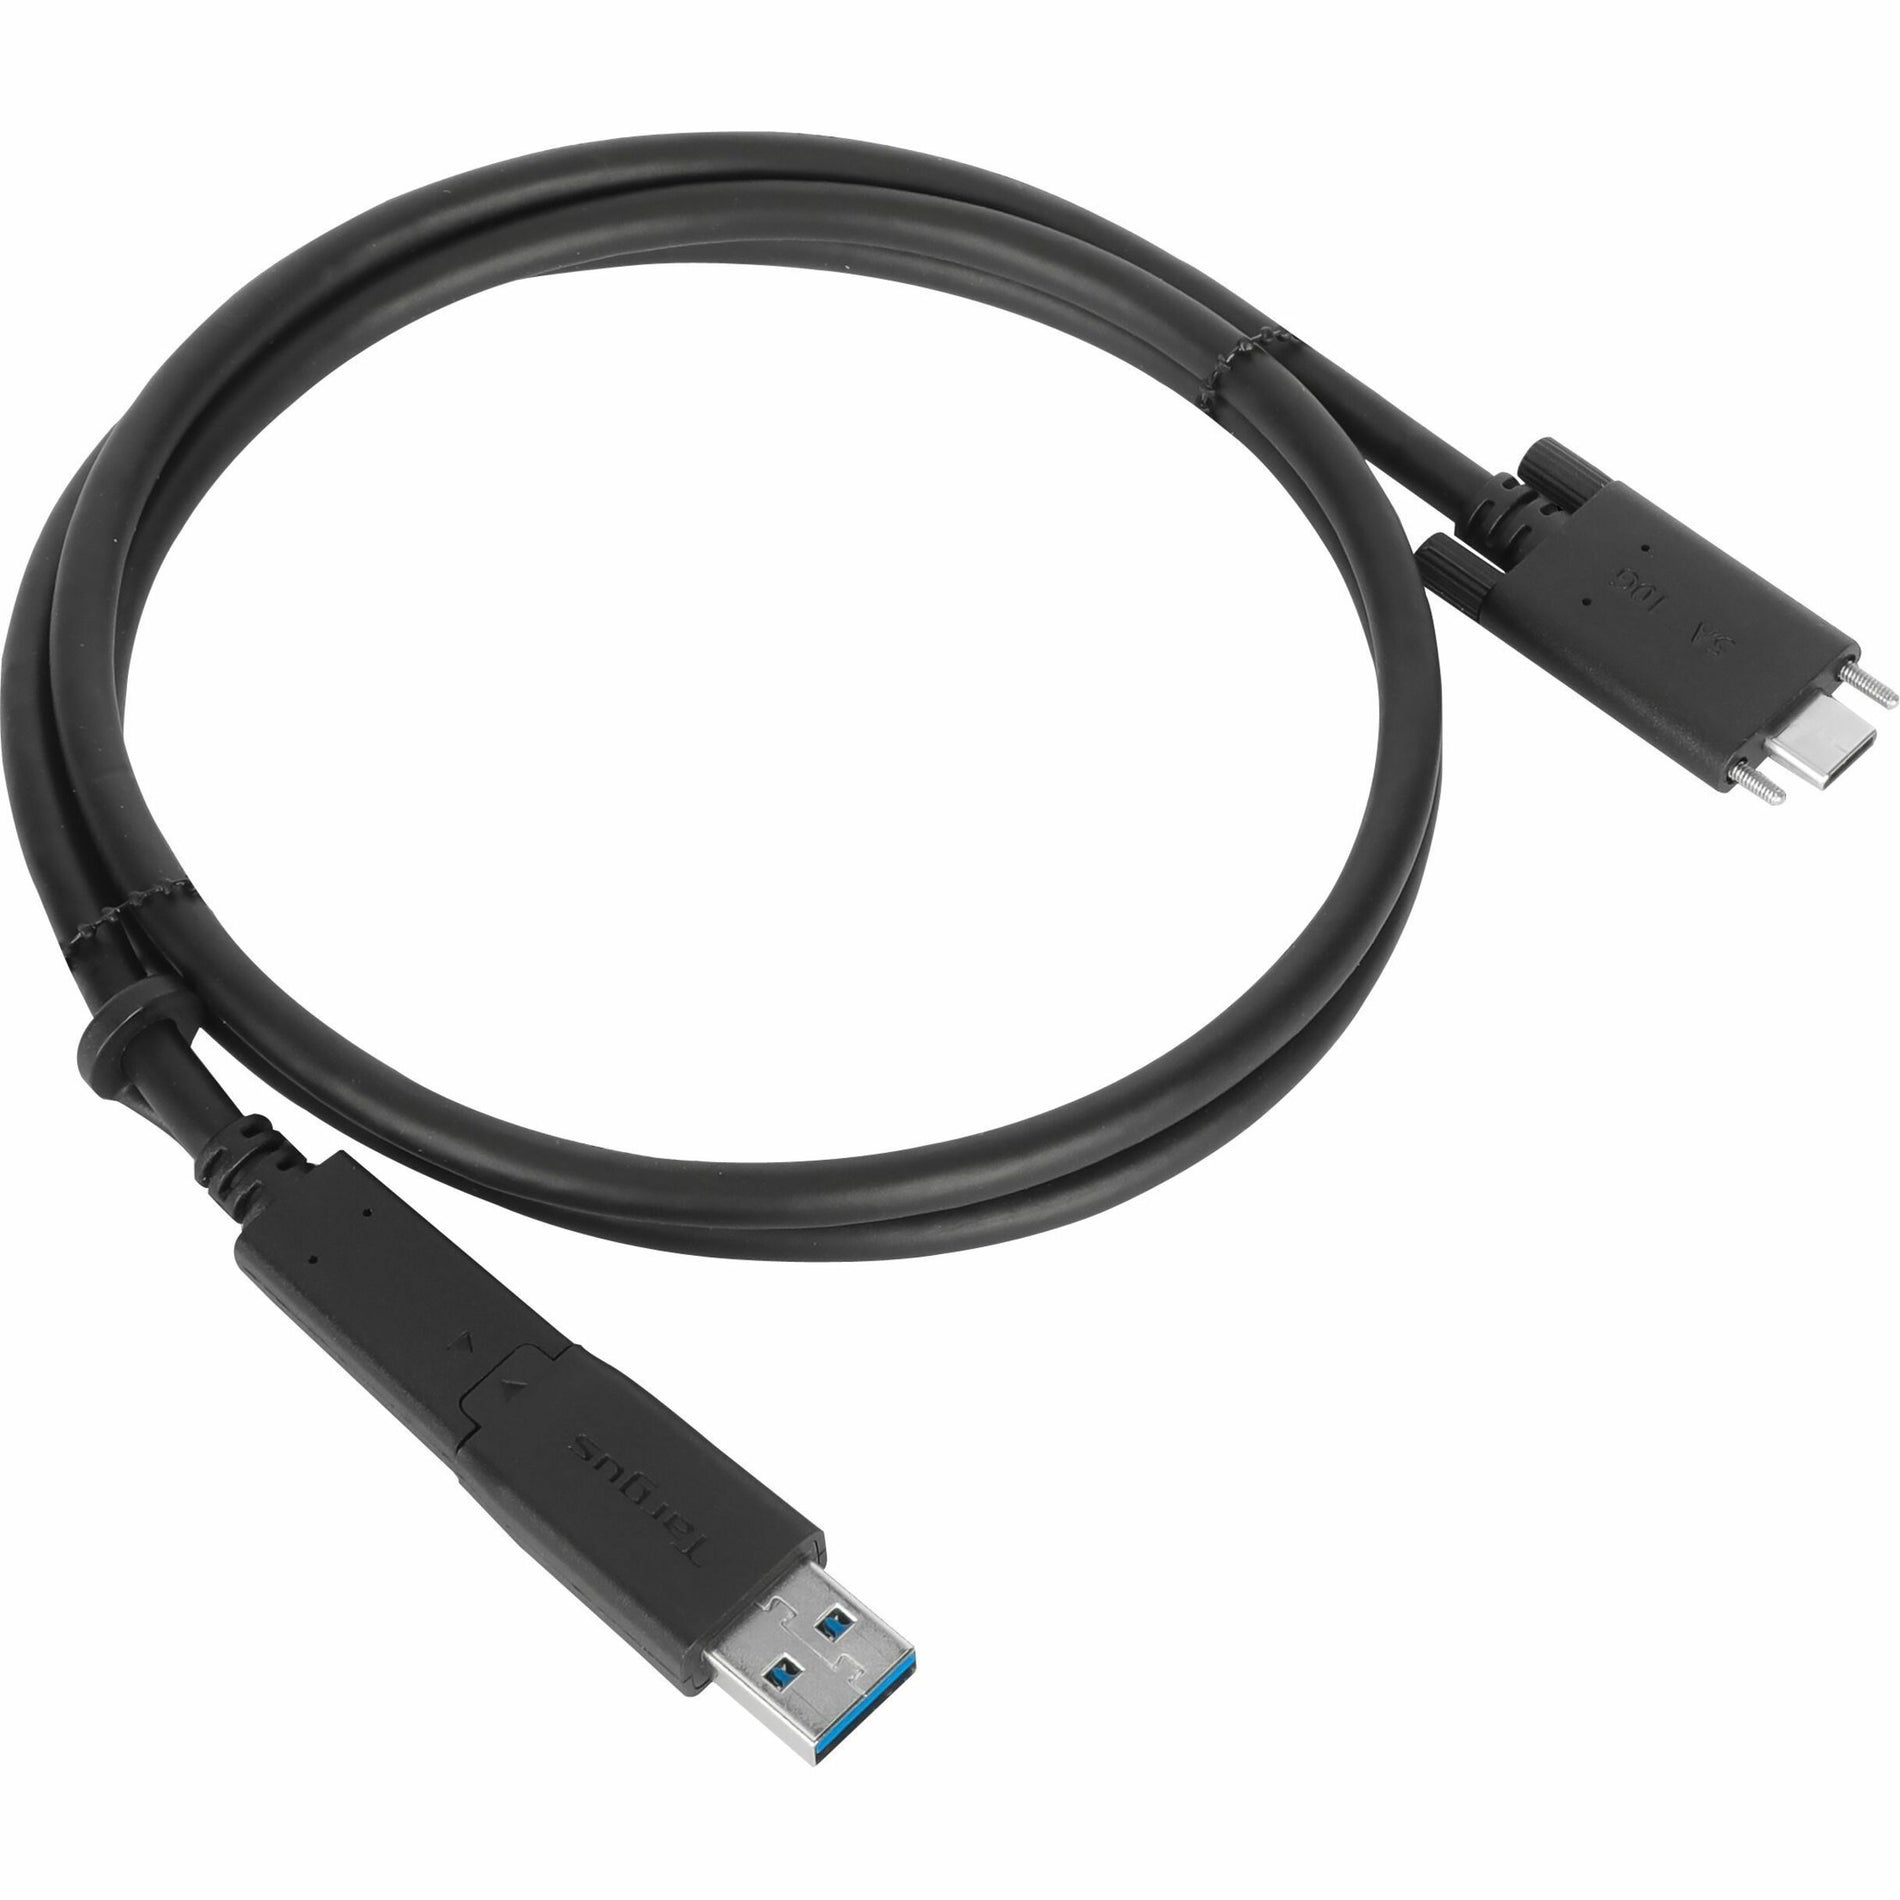 Targus ACC1133GLX 1M USB-C Male with Screw to USB-C Male Cable with USB-A Tether, Data Transfer Cable, 3.28 ft, Black